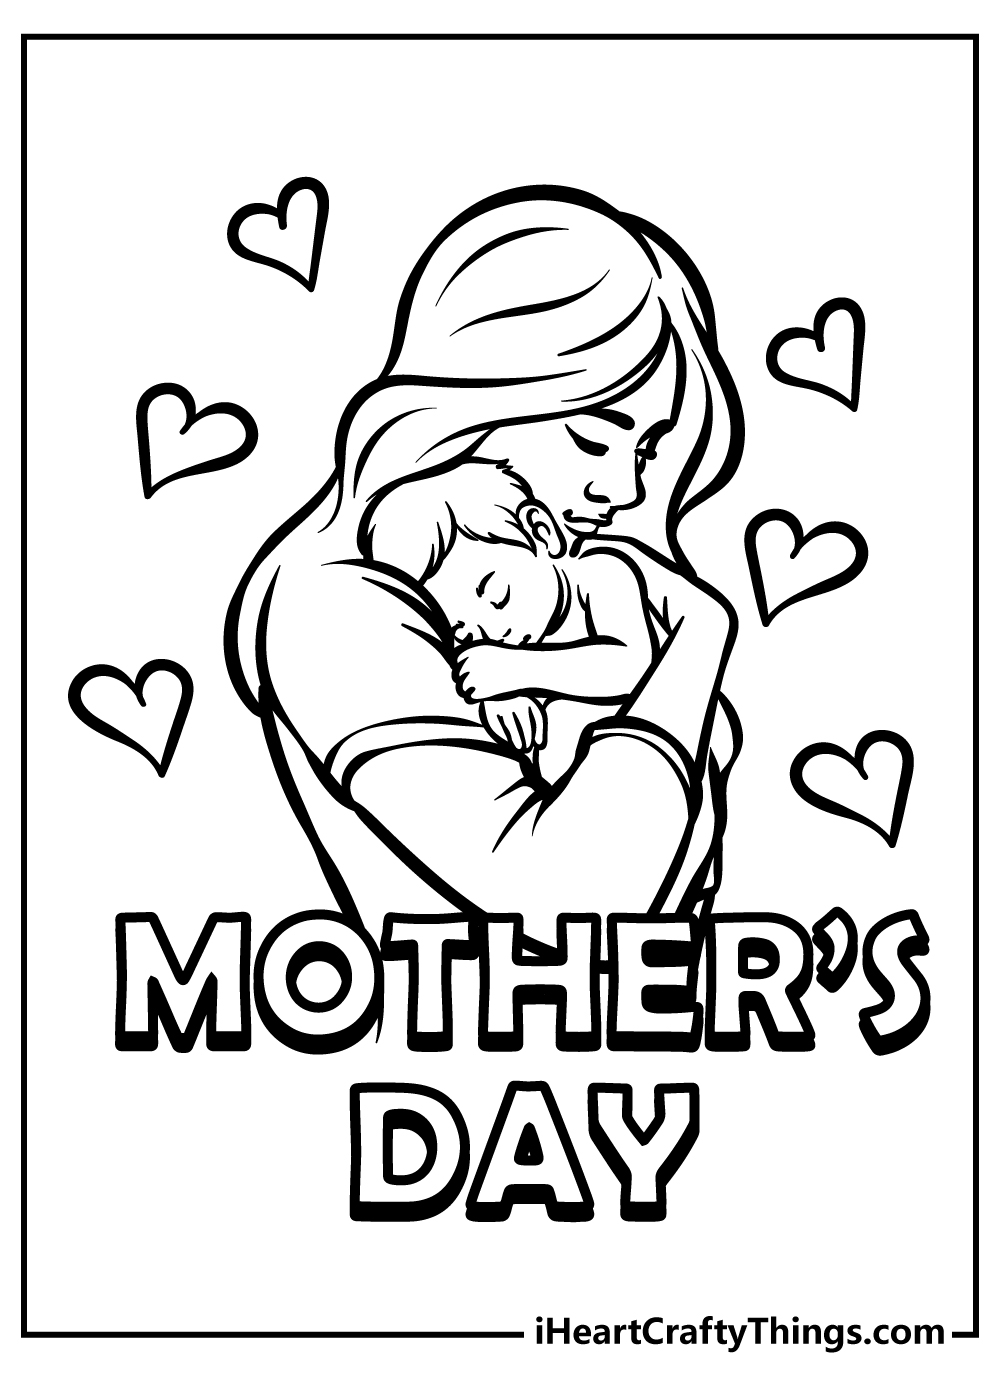 Mother's Day Drawing for kids - step by step - YouTube #mother'sday #drawing  #mothersday #happymo… | Mothers day drawings, Drawing for kids, Easy  drawings for kids